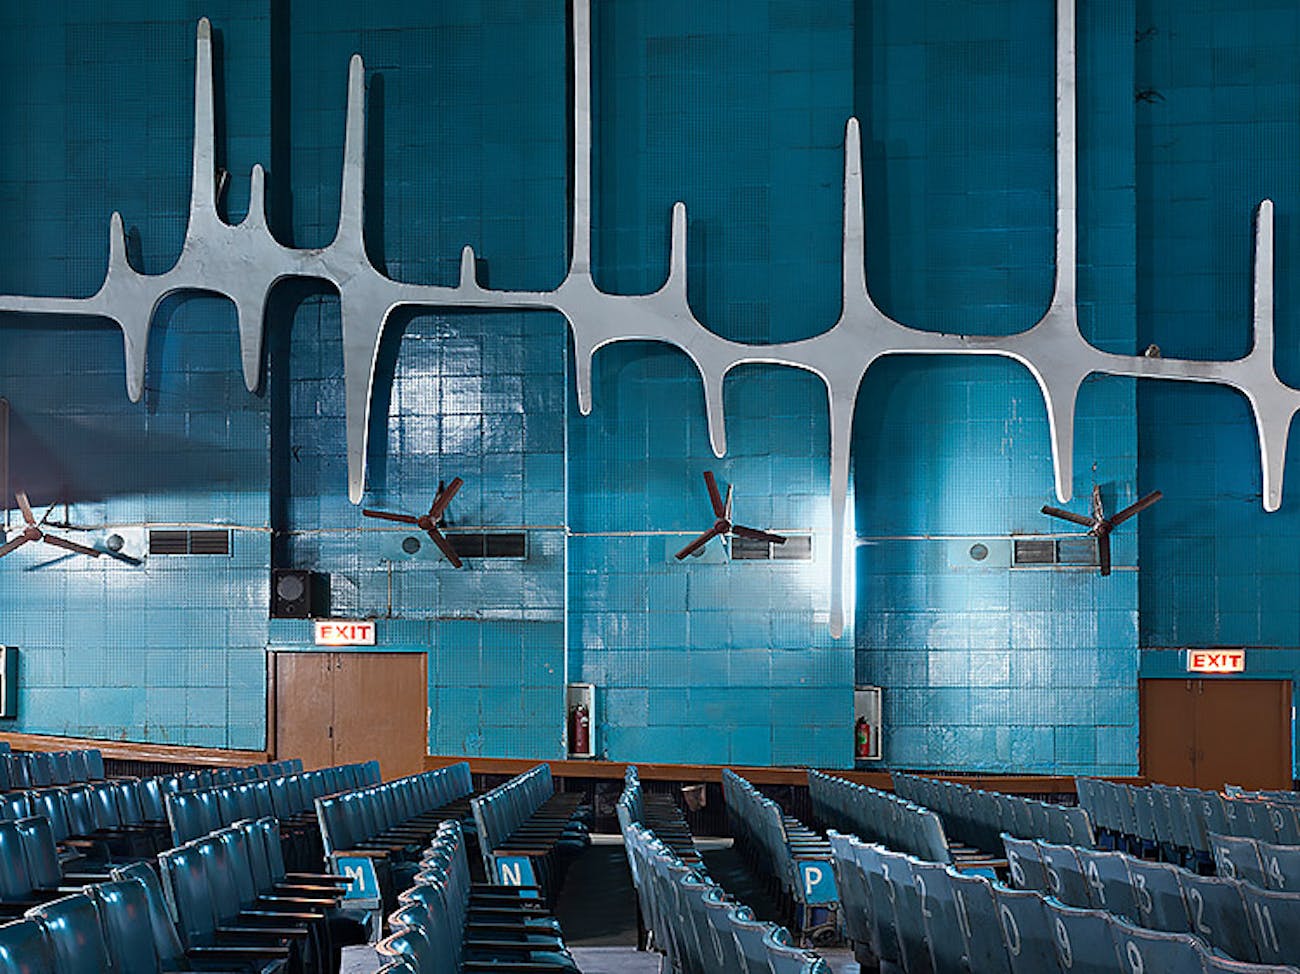 Cinema seating in a blue, tiled interior